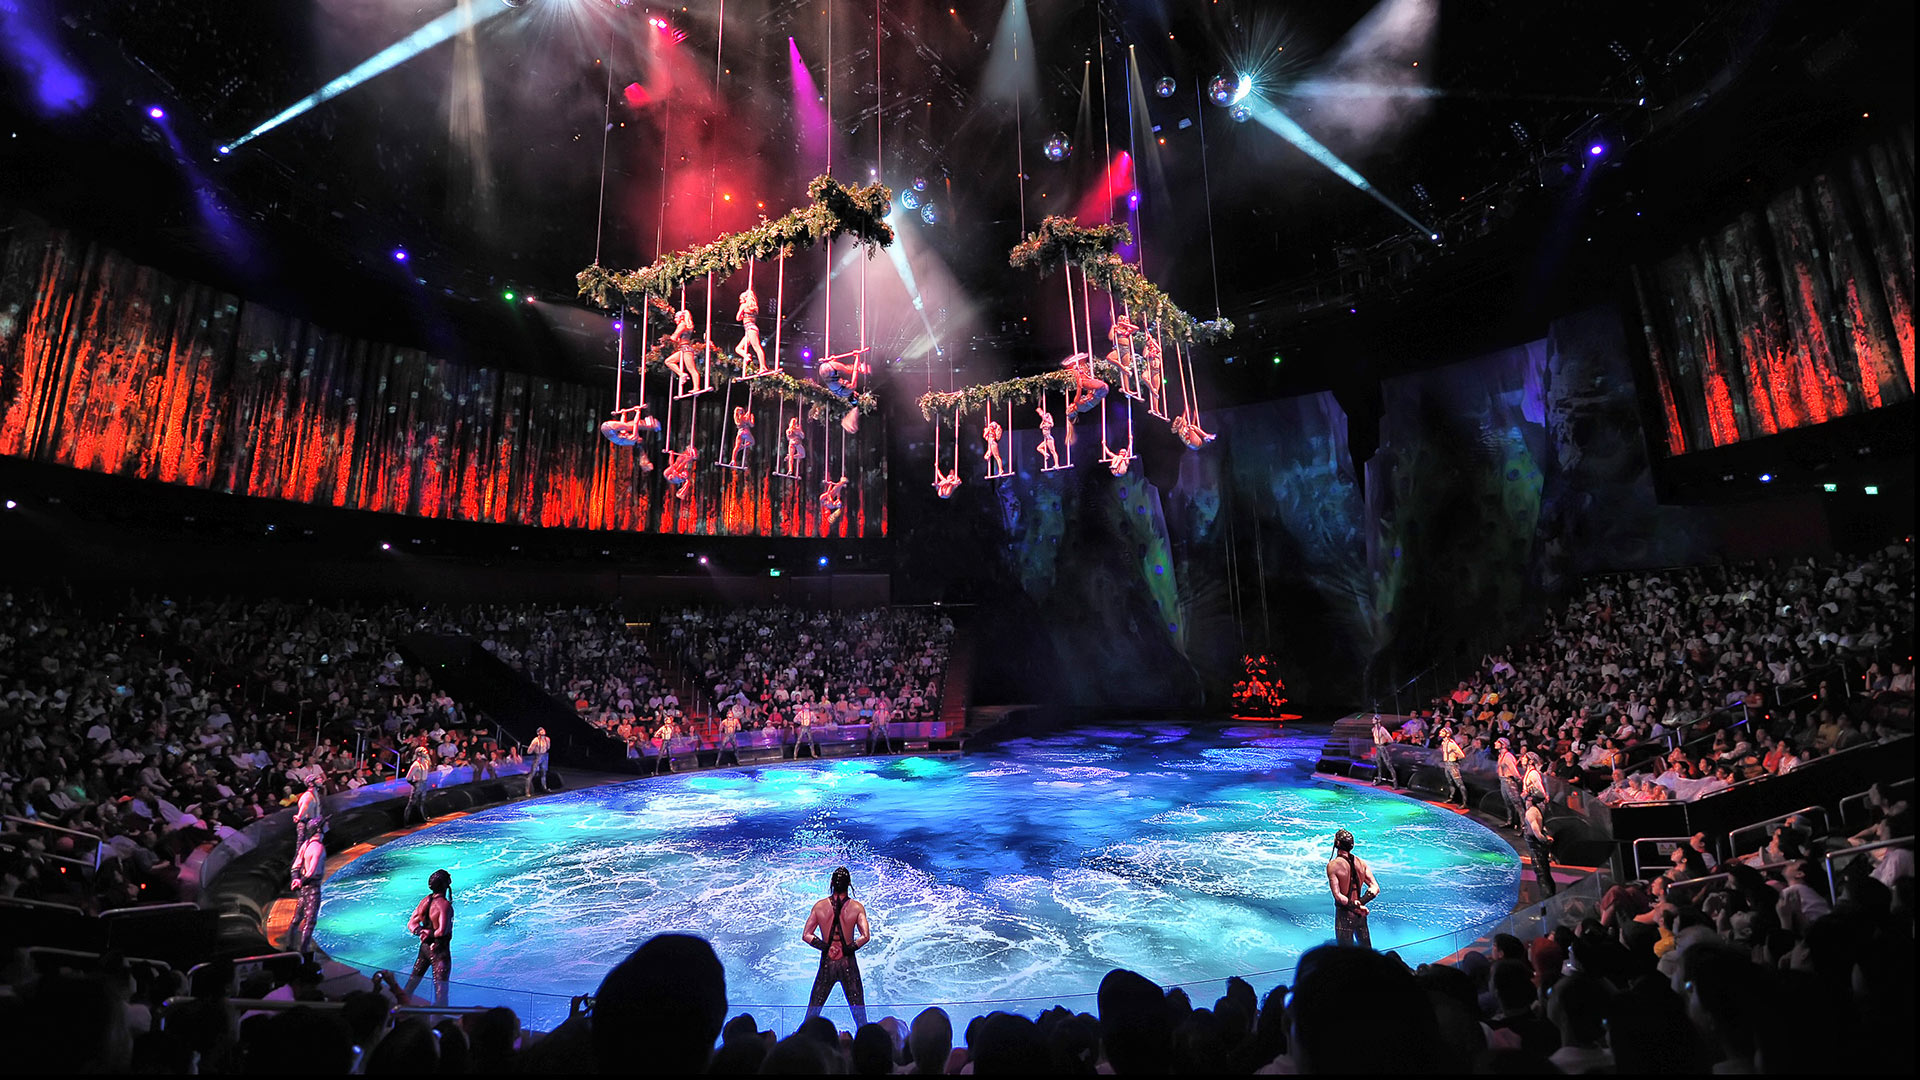 City of Dreams, The House of Dancing Water Theater